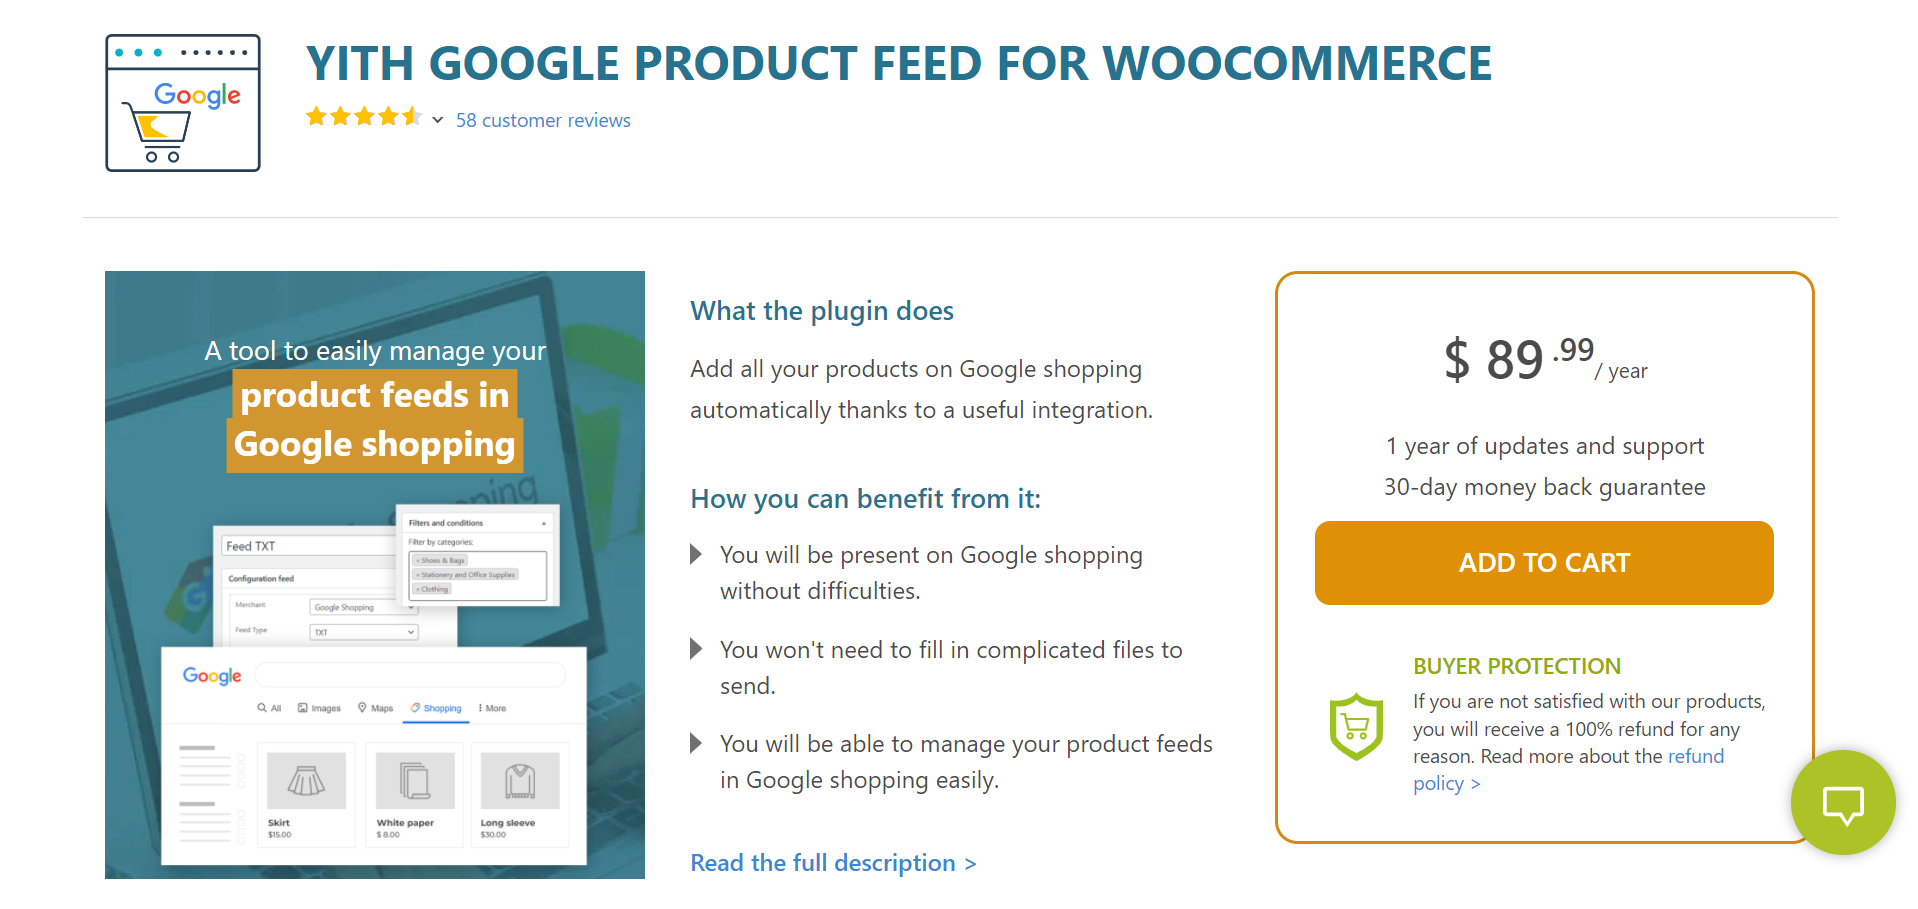 Export your WooCommerce Product Feed with the help of these Google Shopping Plugins | YITH google product feed for WooCommerce